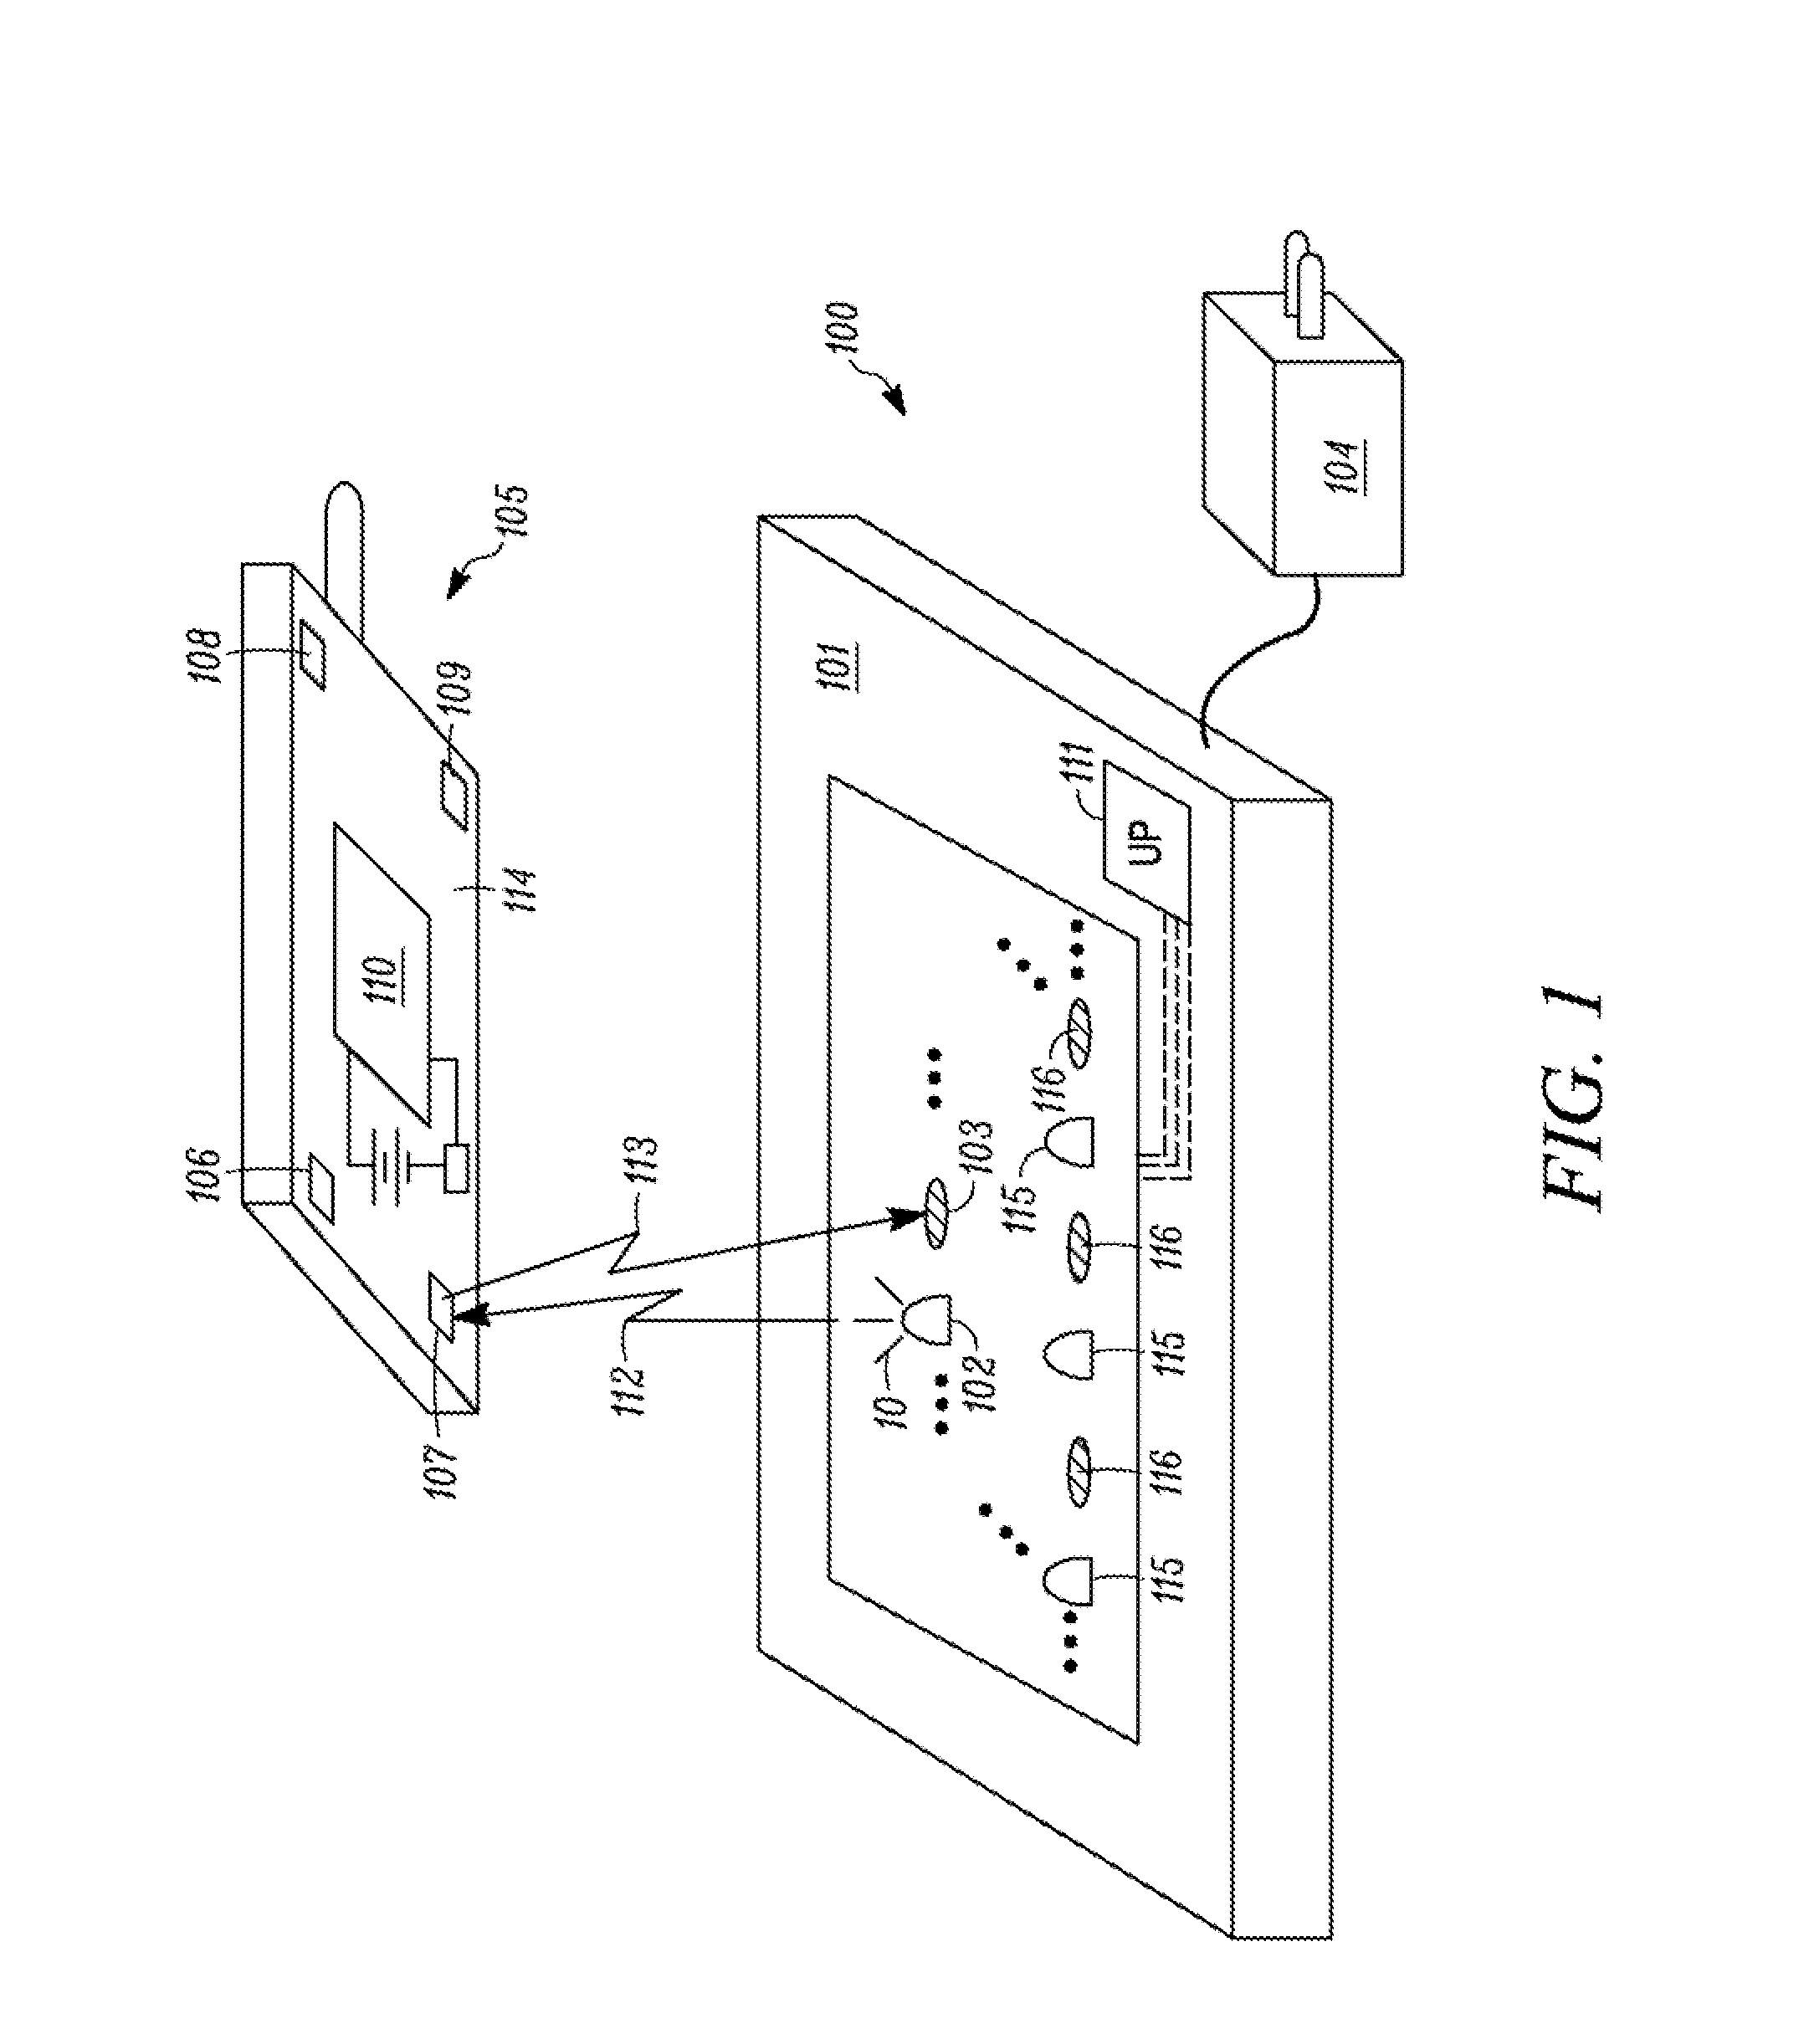 Light pad charger for electronic devices